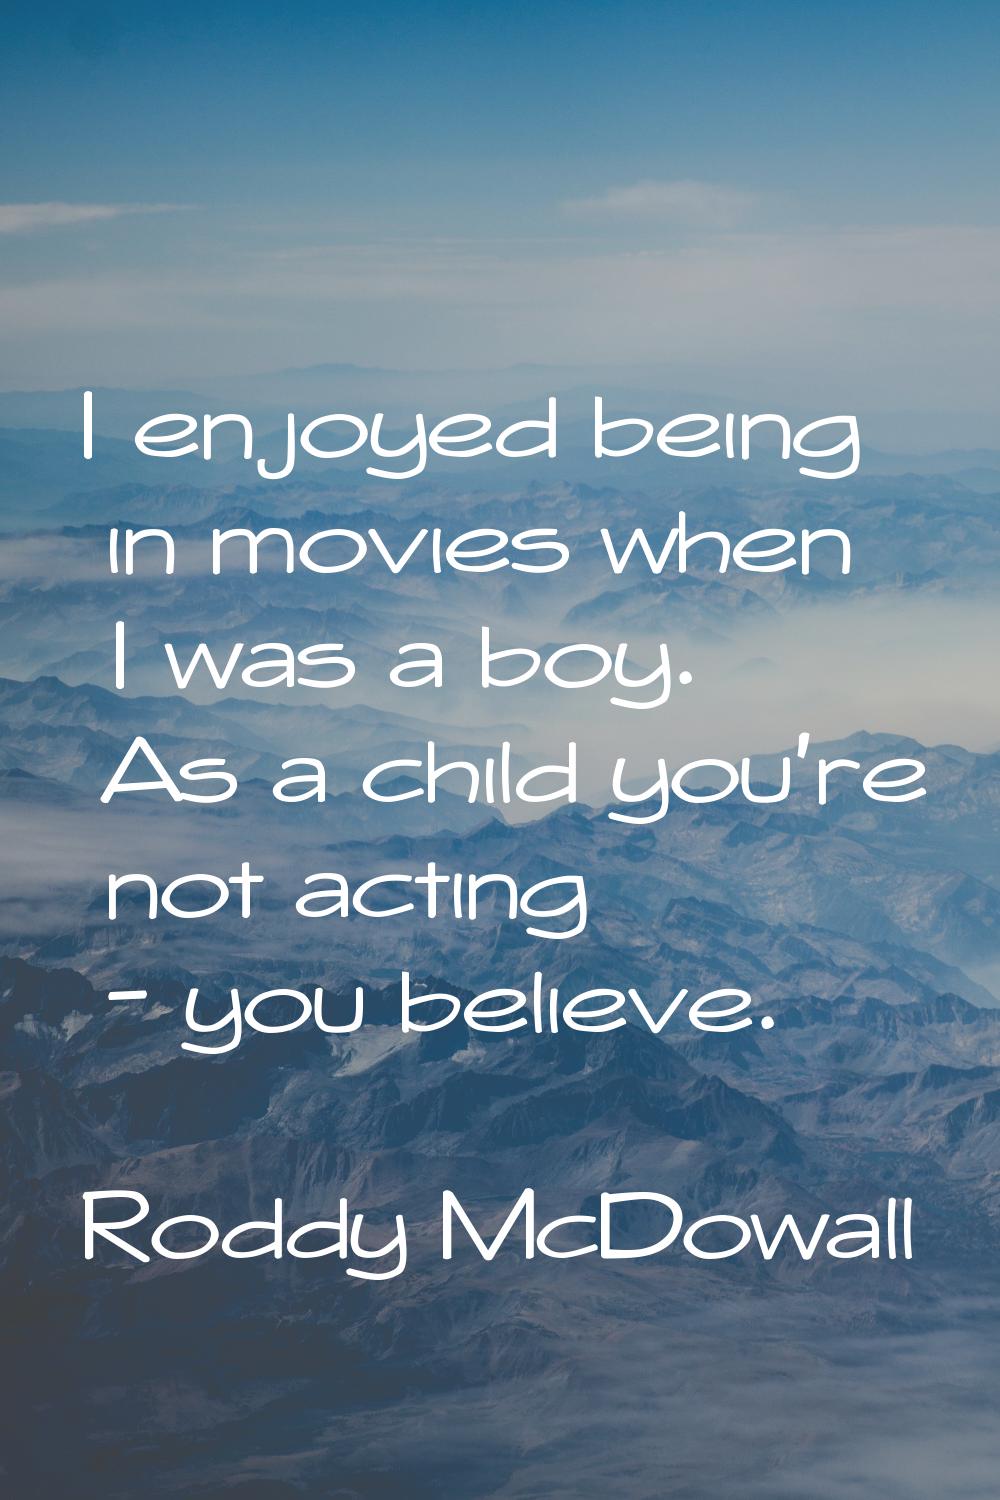 I enjoyed being in movies when I was a boy. As a child you're not acting - you believe.